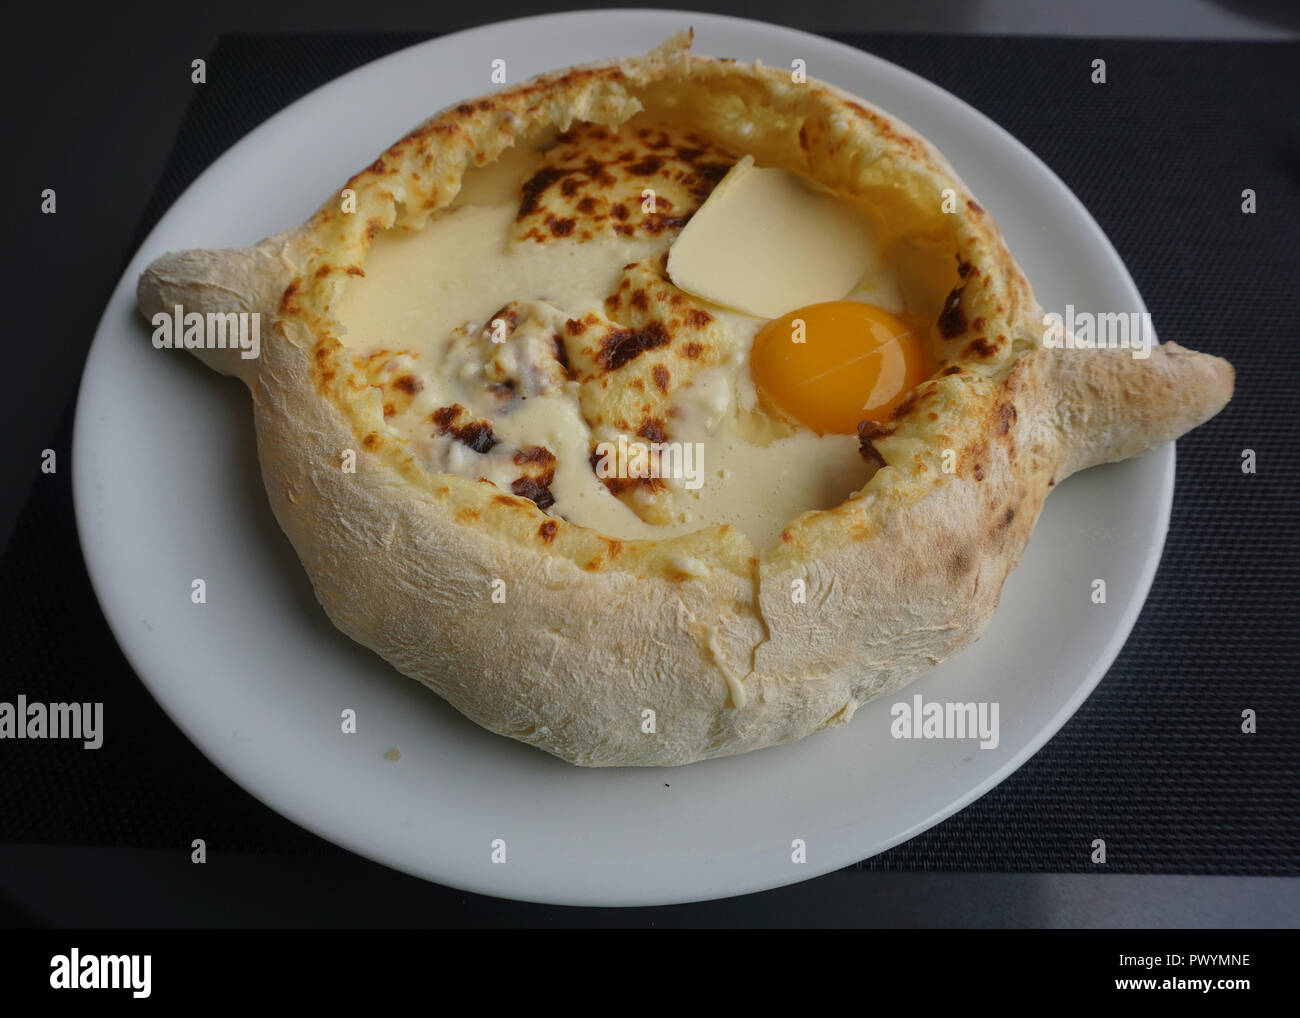 Georgian Khachapuri Ajaruli Served with Butter and Egg on a Plate Stock Photo